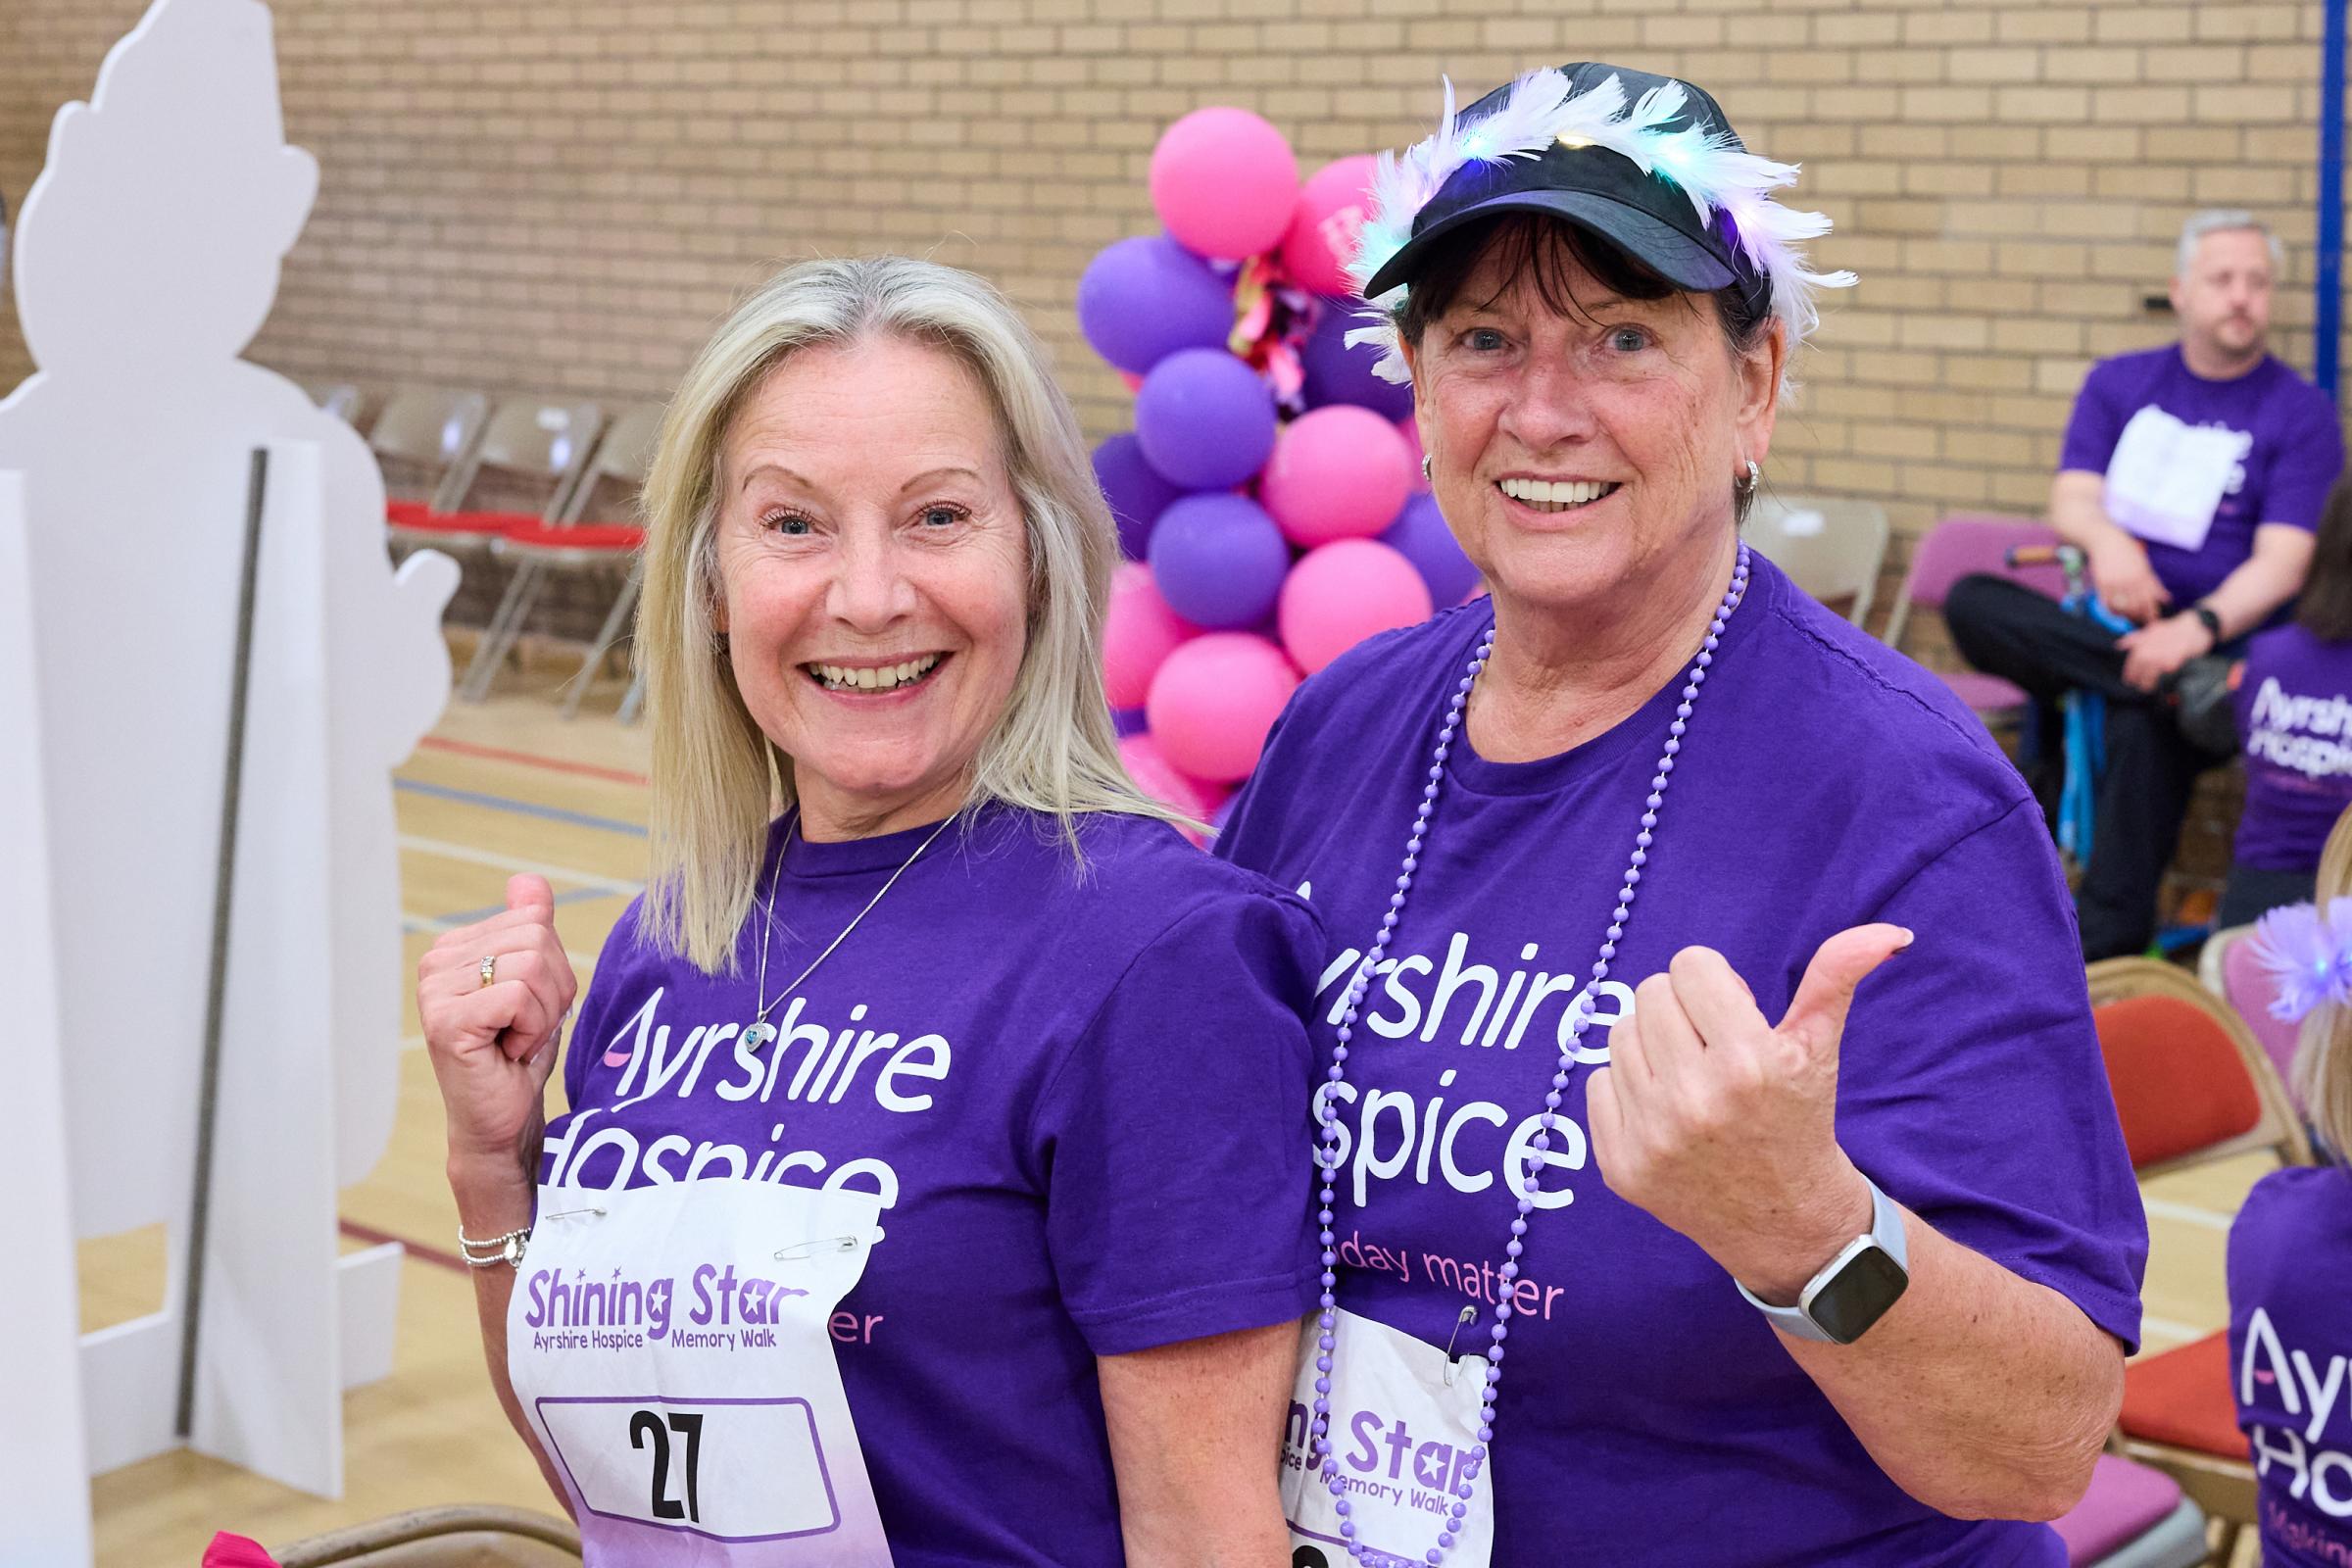 More than 300 people took part in Ayrshire Hospices Shining Star Memory Walk (Photo: AMD Studios/Ayrshire Hospice)